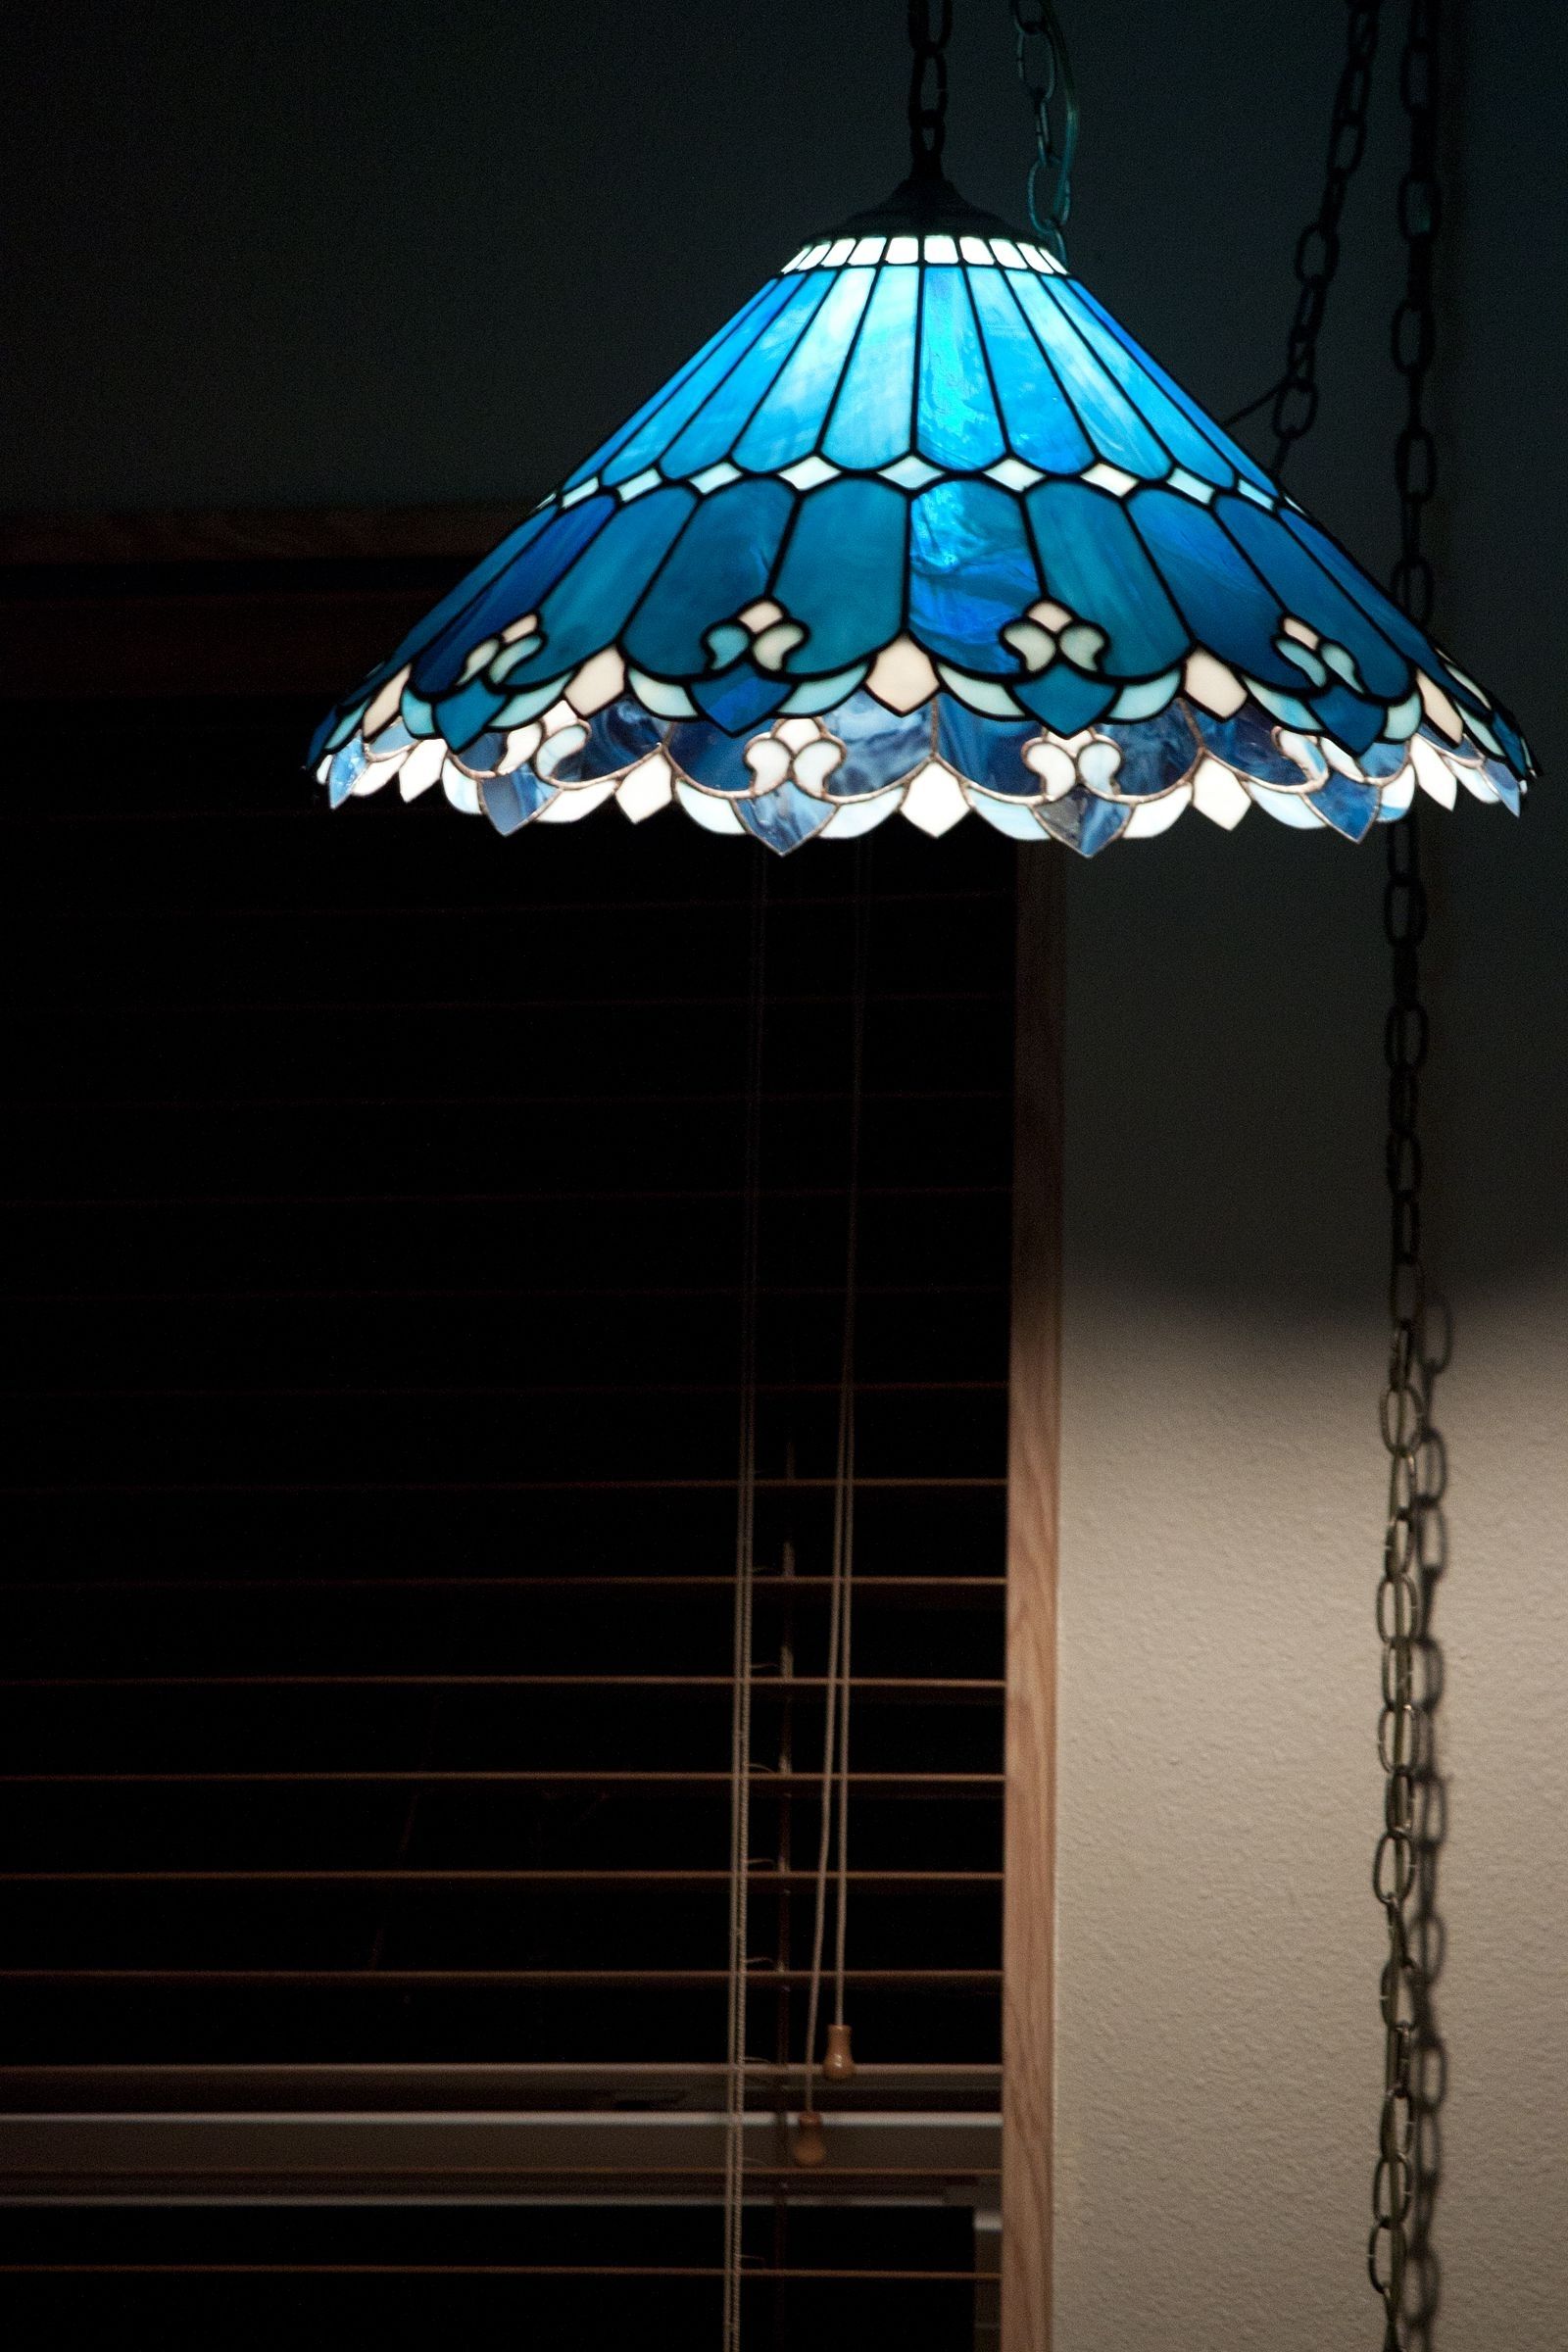 Turquoise Chandelier Lamp Shades Intended For Famous Day 41 – Tiffany Lamp? (View 11 of 15)